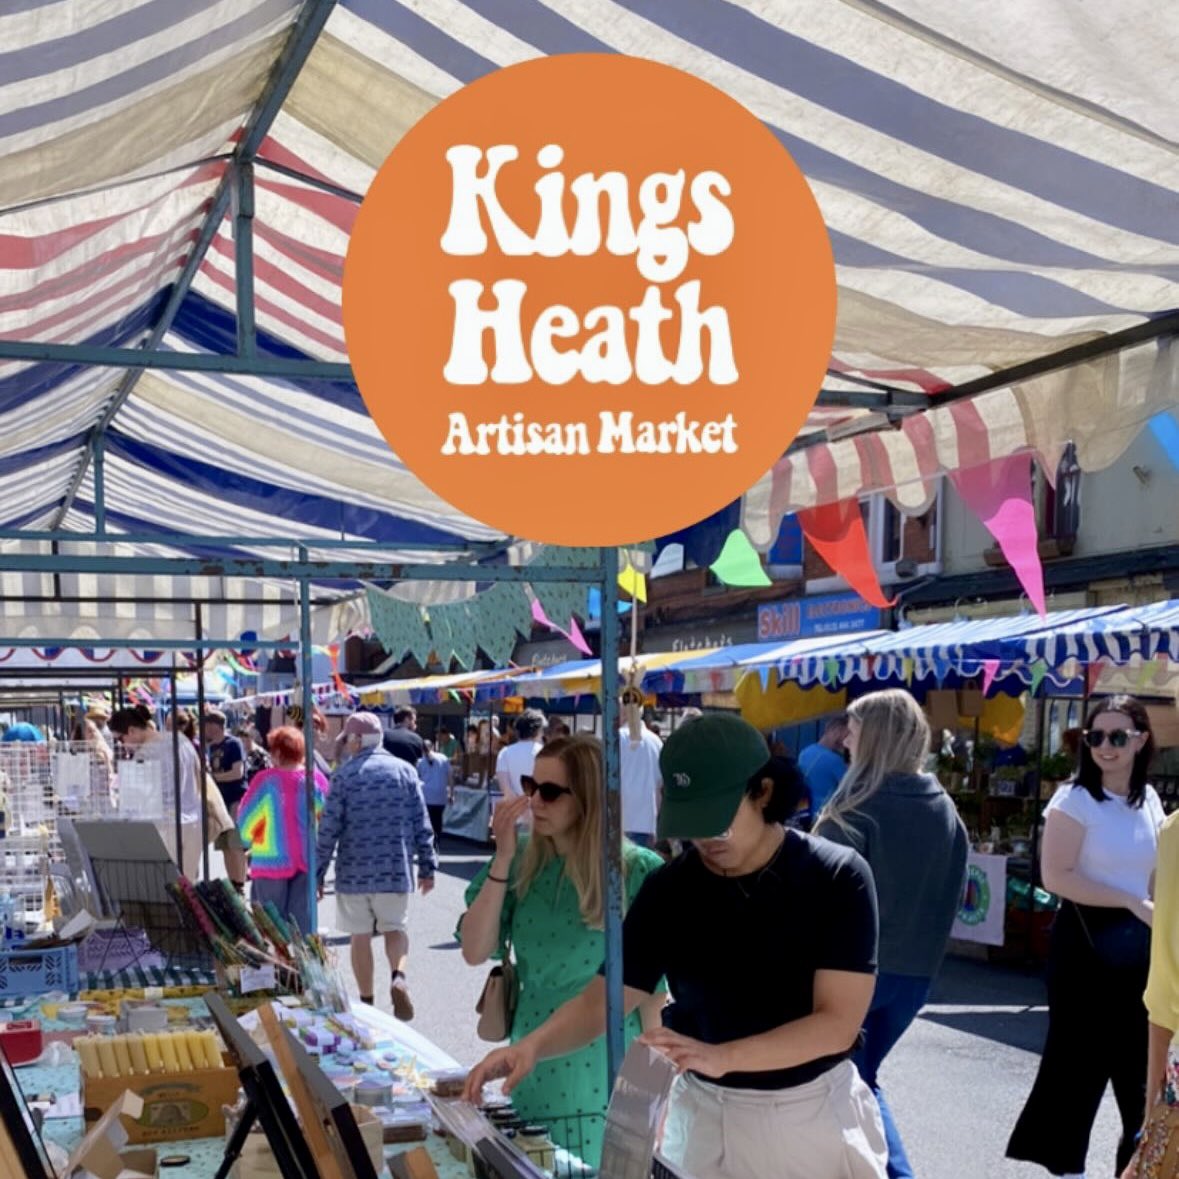 IT’S BACK! Kings Heath’s York Road will be filled with interesting stalls from all sorts of great local creatives, crafters and makers of good things this SUNDAY 10-3pm. I’ll be there with my art prints of Brum 🧡 #brum #kingsheath #birmingham